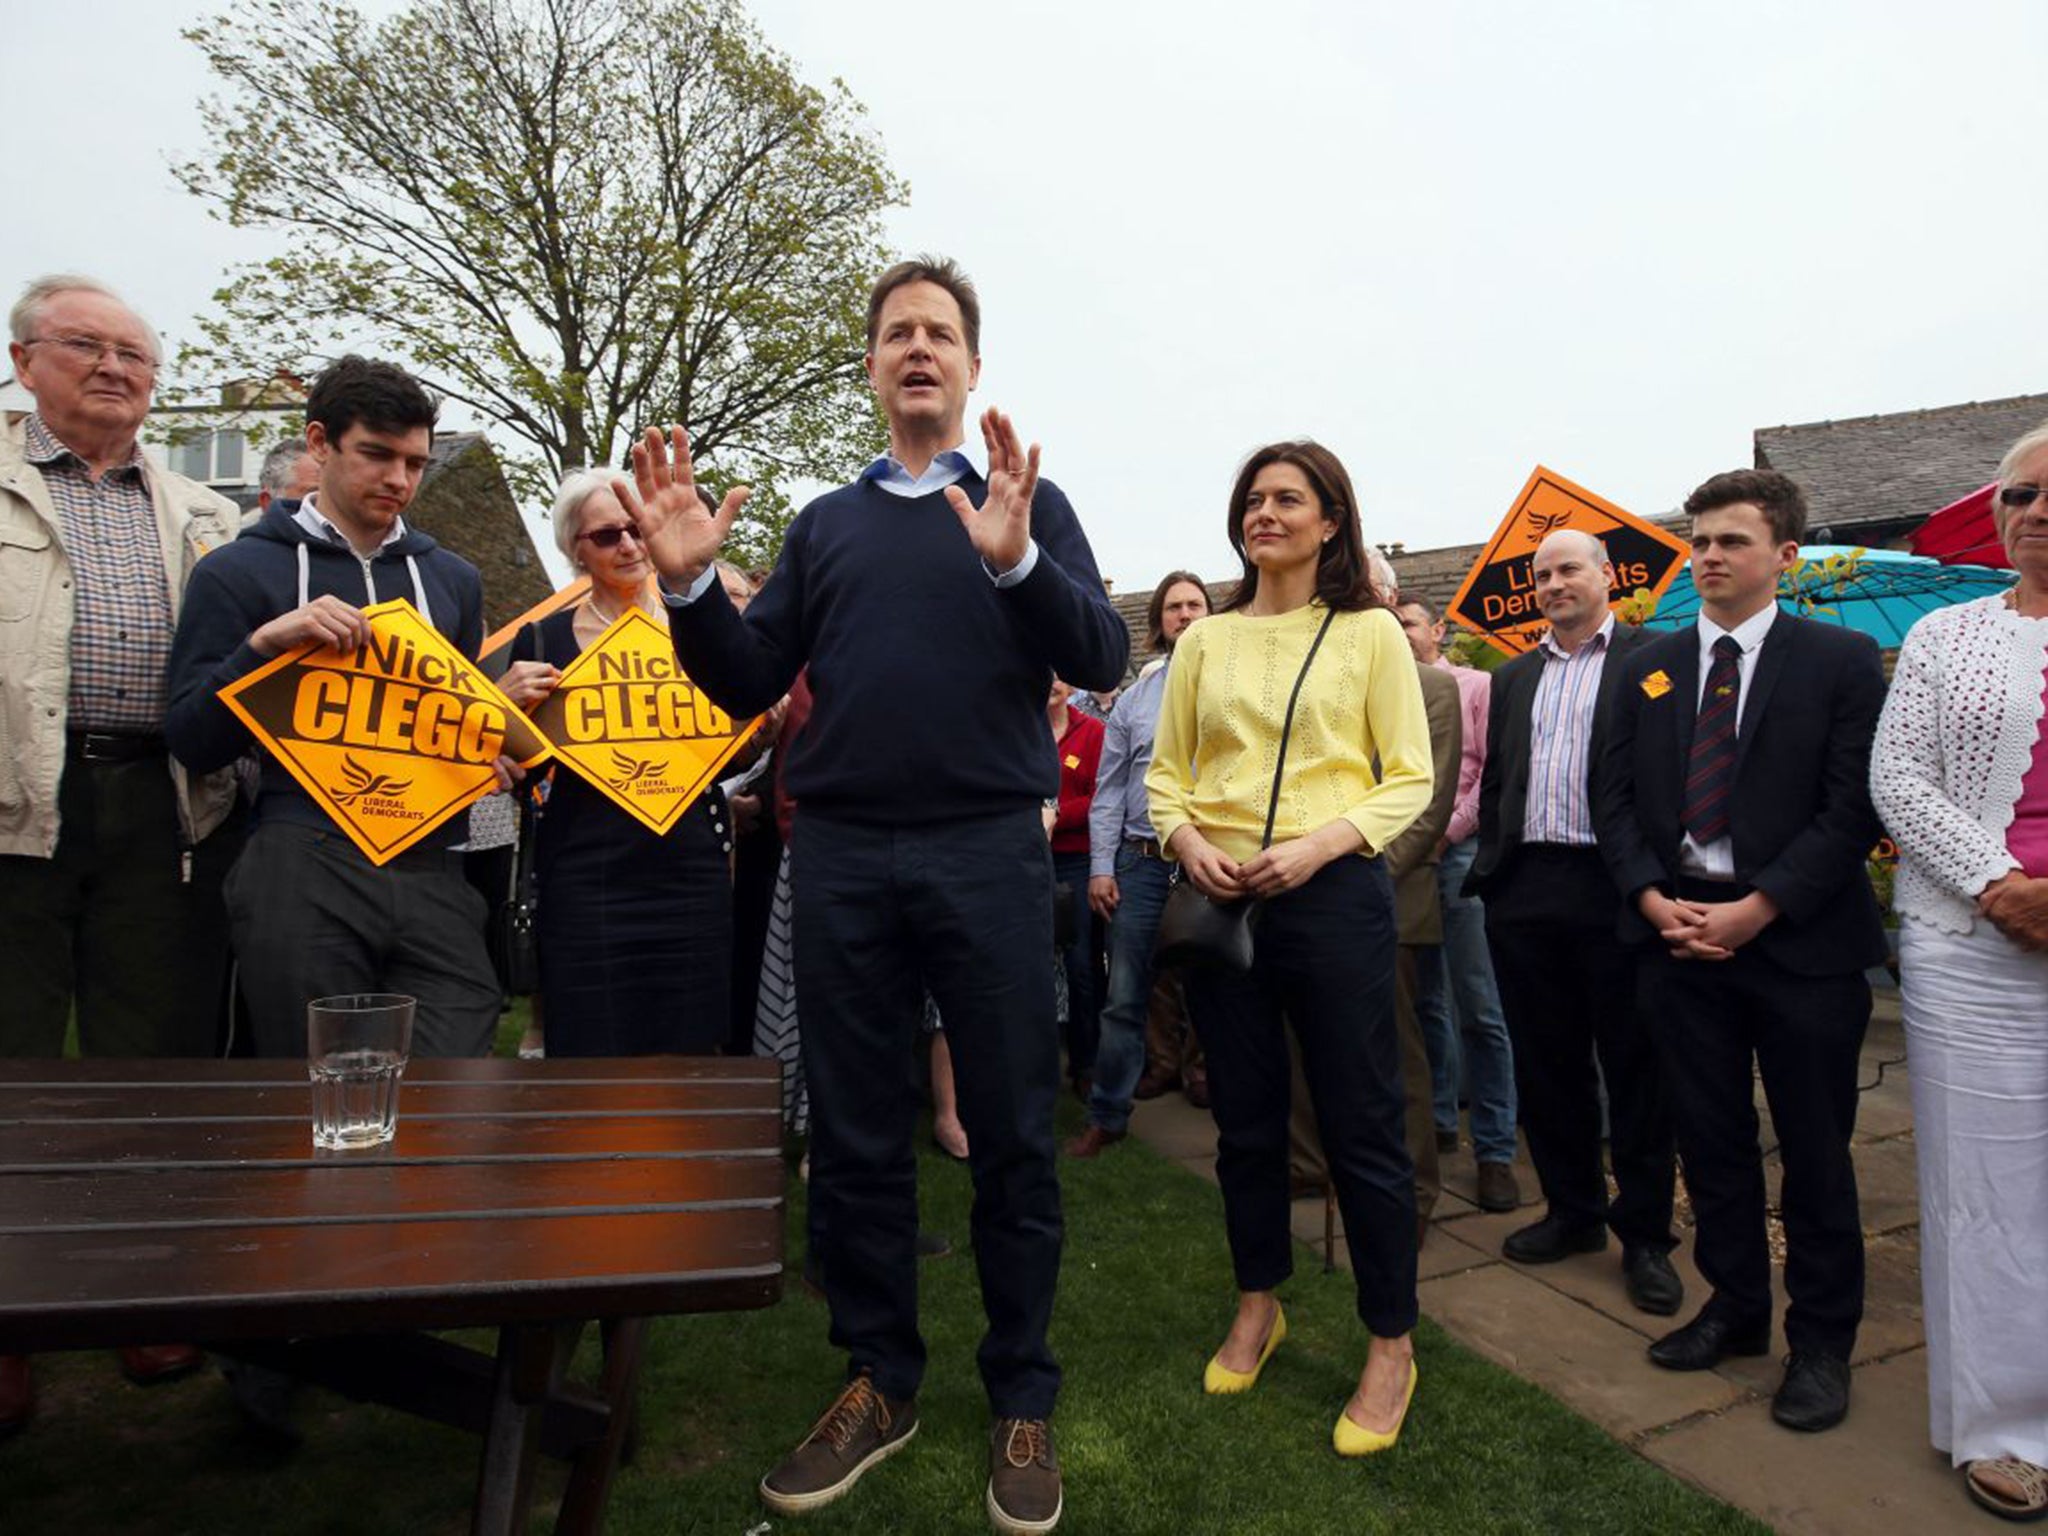 Nick Clegg will launch the Lib Dem environment mini-manifesto this week which will include pledges for a legal requirement for zero carbon power by 2050